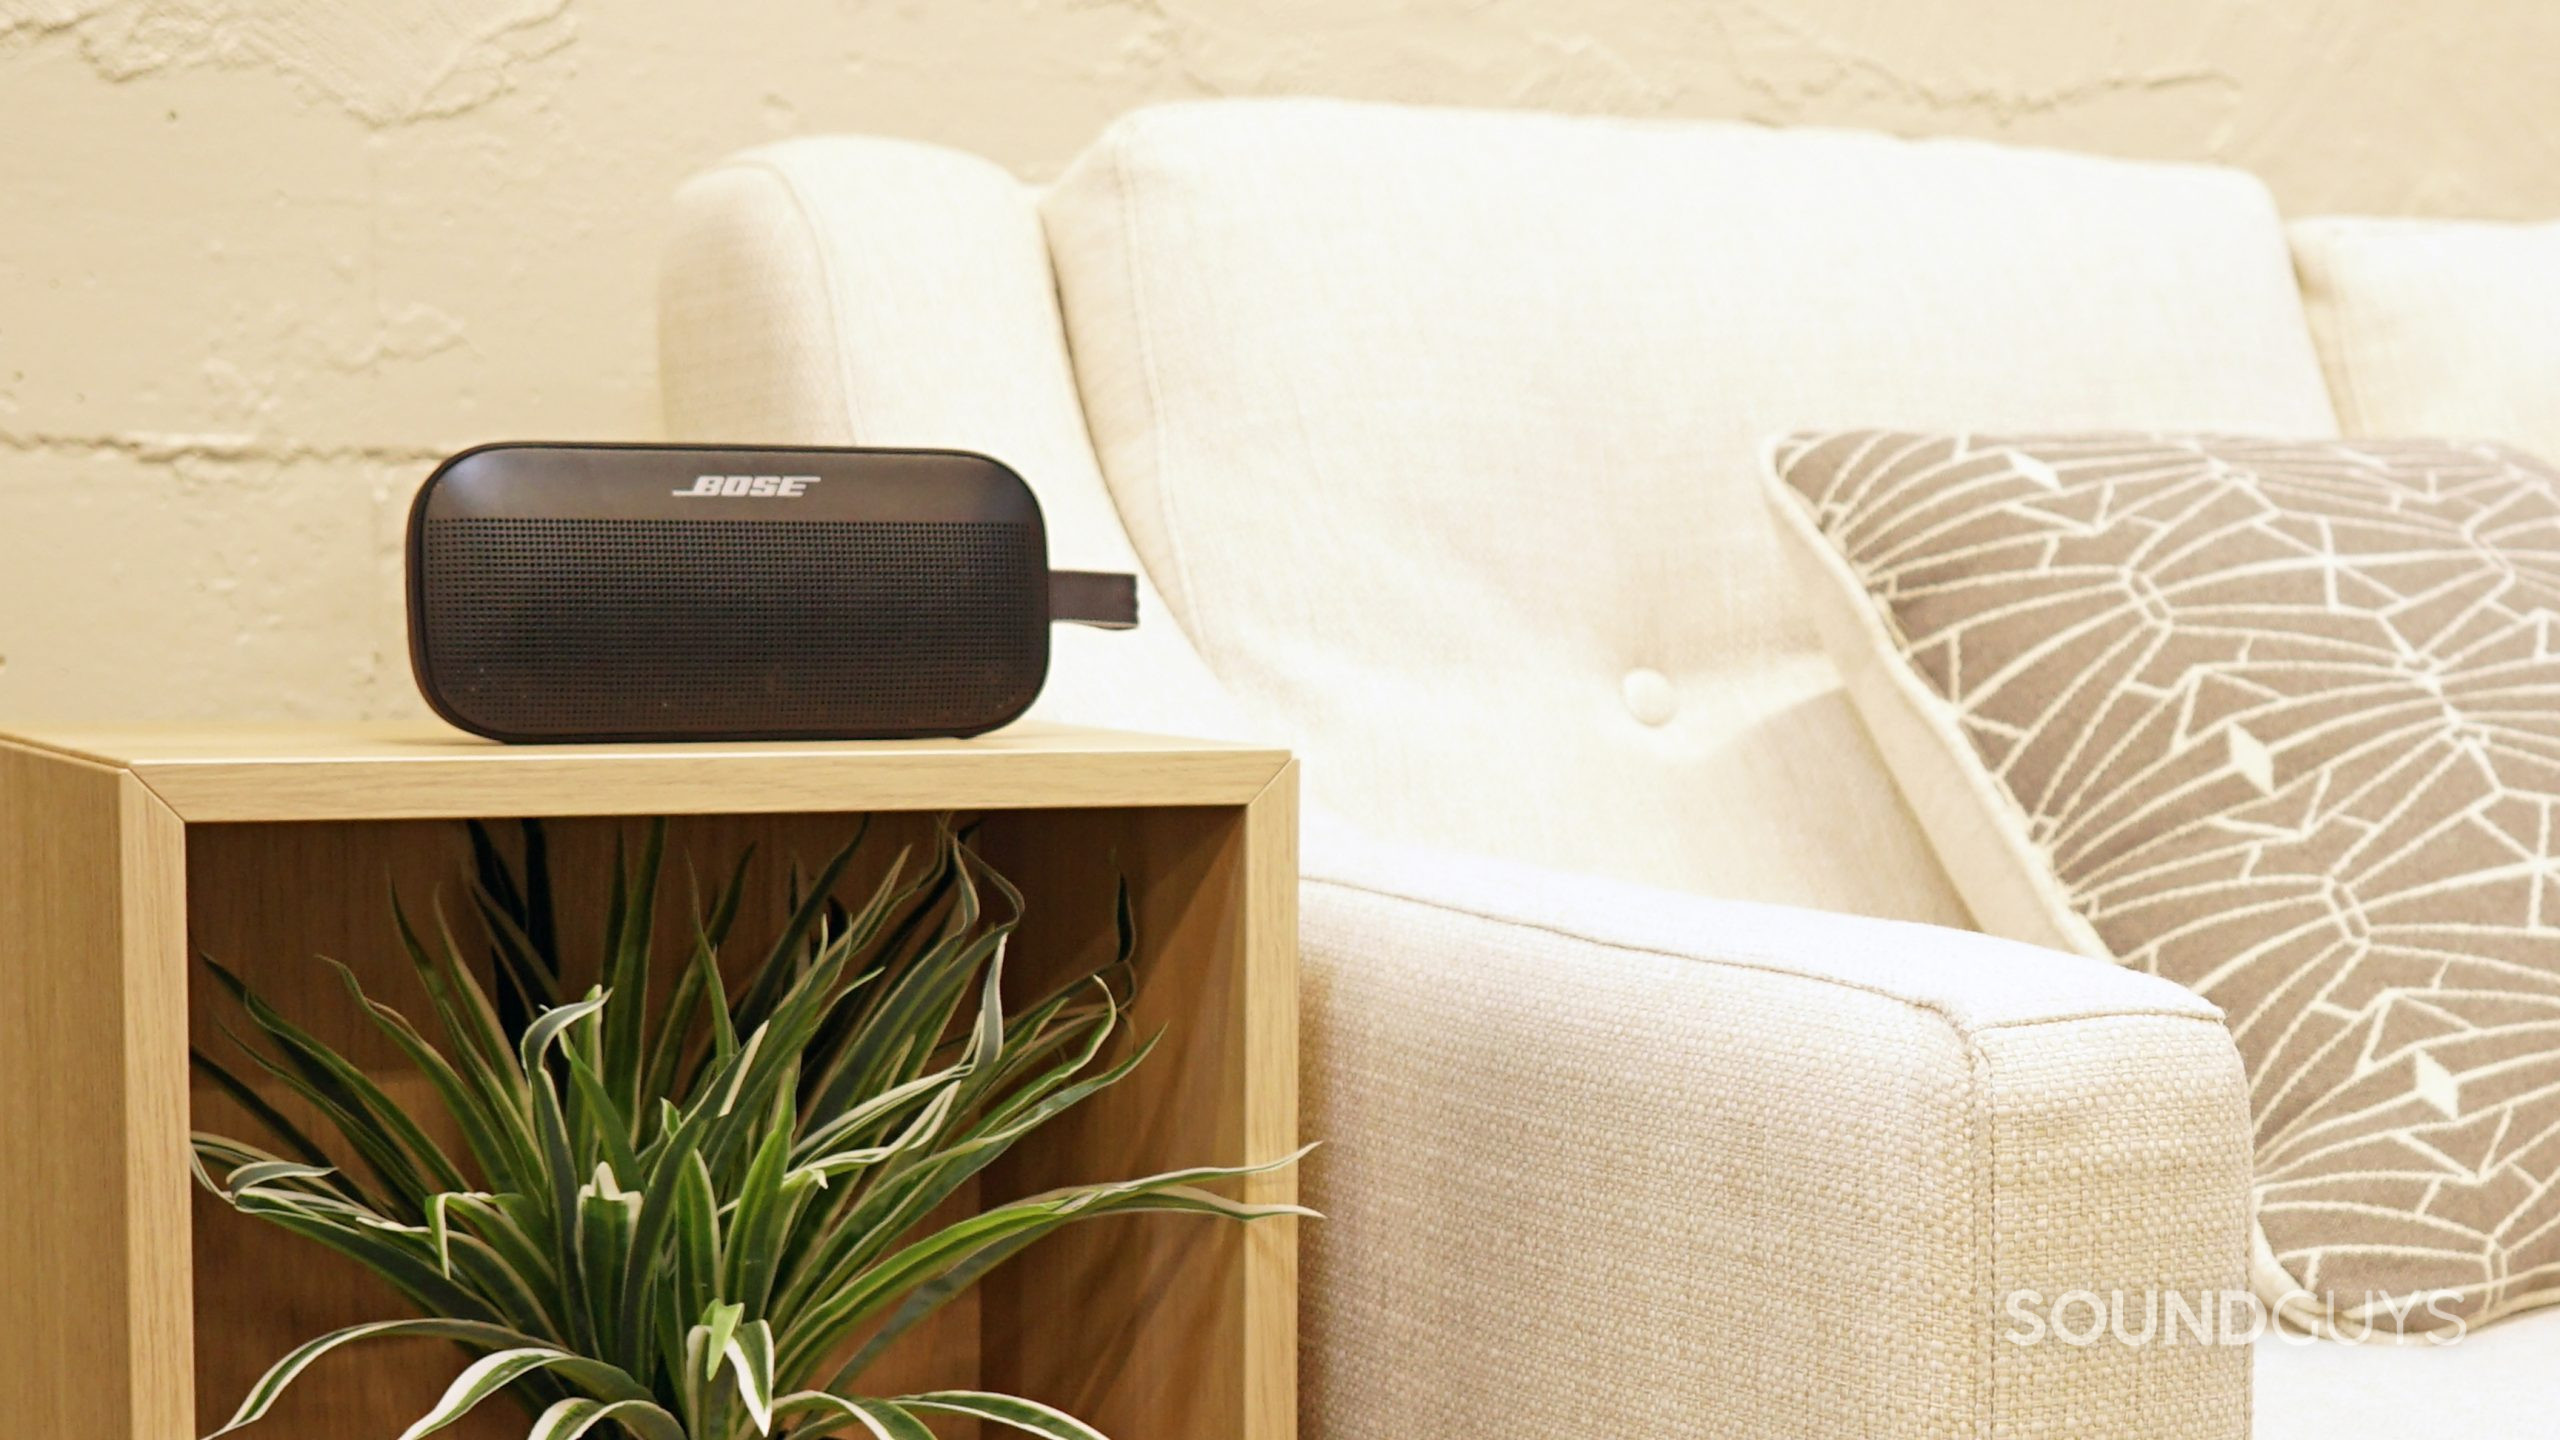 A photo of the Bose SoundLink Flex Bluetooth speaker sitting on a wooden box above a plant next to a white sofa.